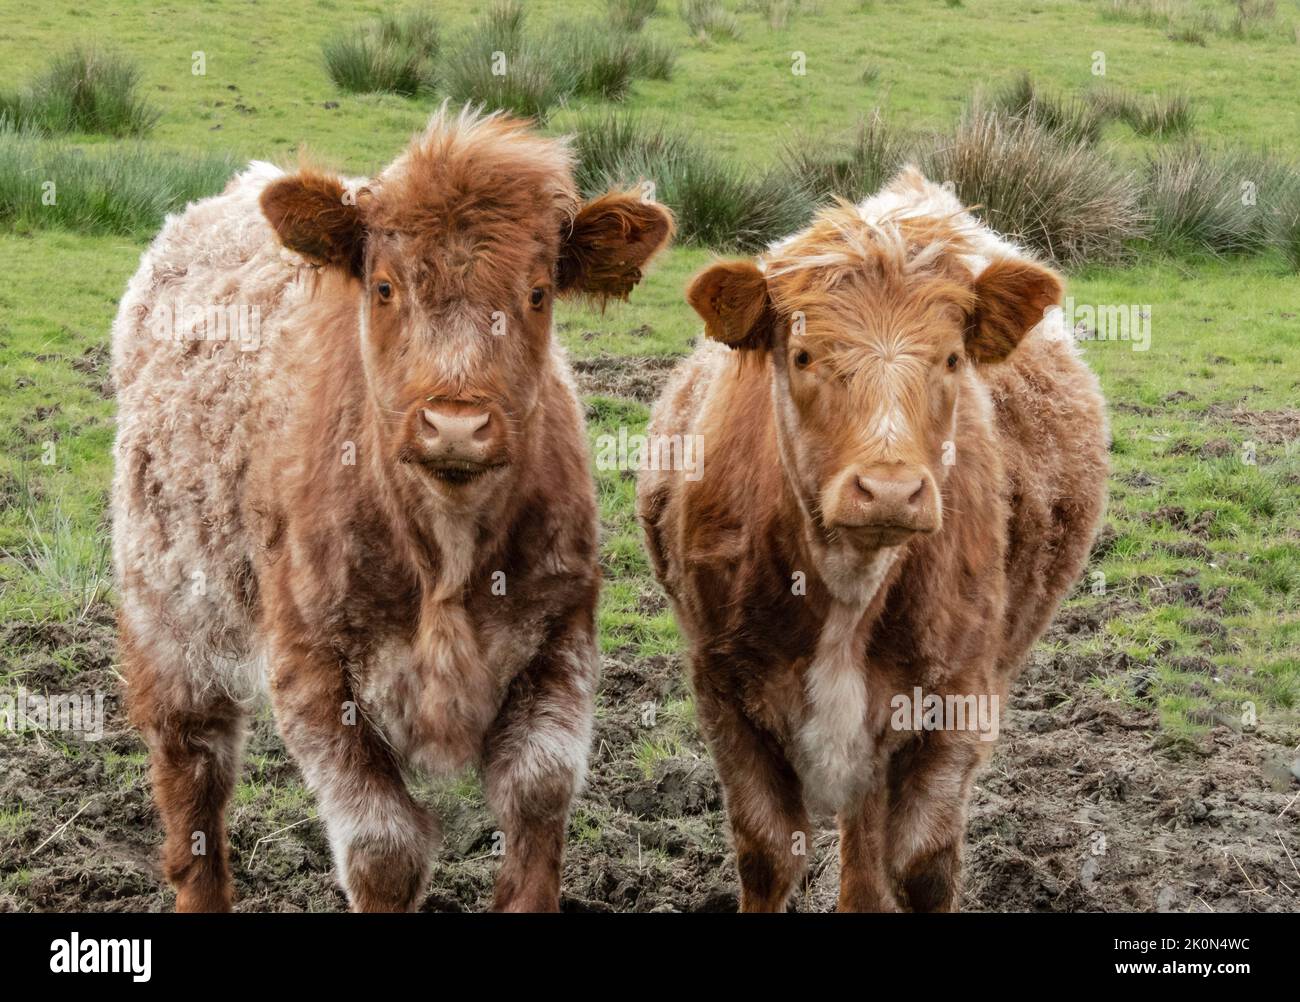 Two highland cattle calves in a muddy field with tufts of green grass Stock Photo